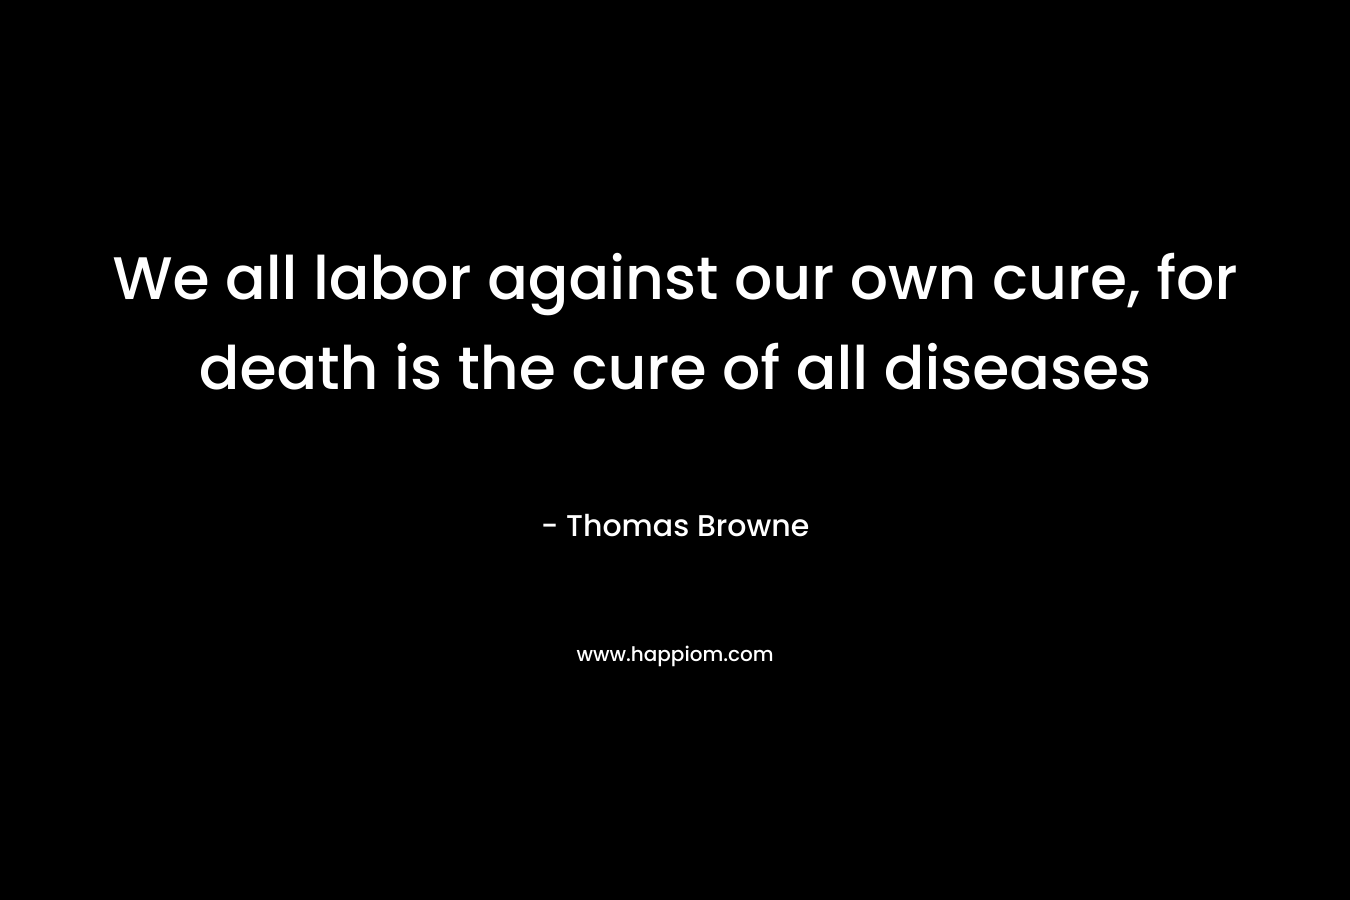 We all labor against our own cure, for death is the cure of all diseases